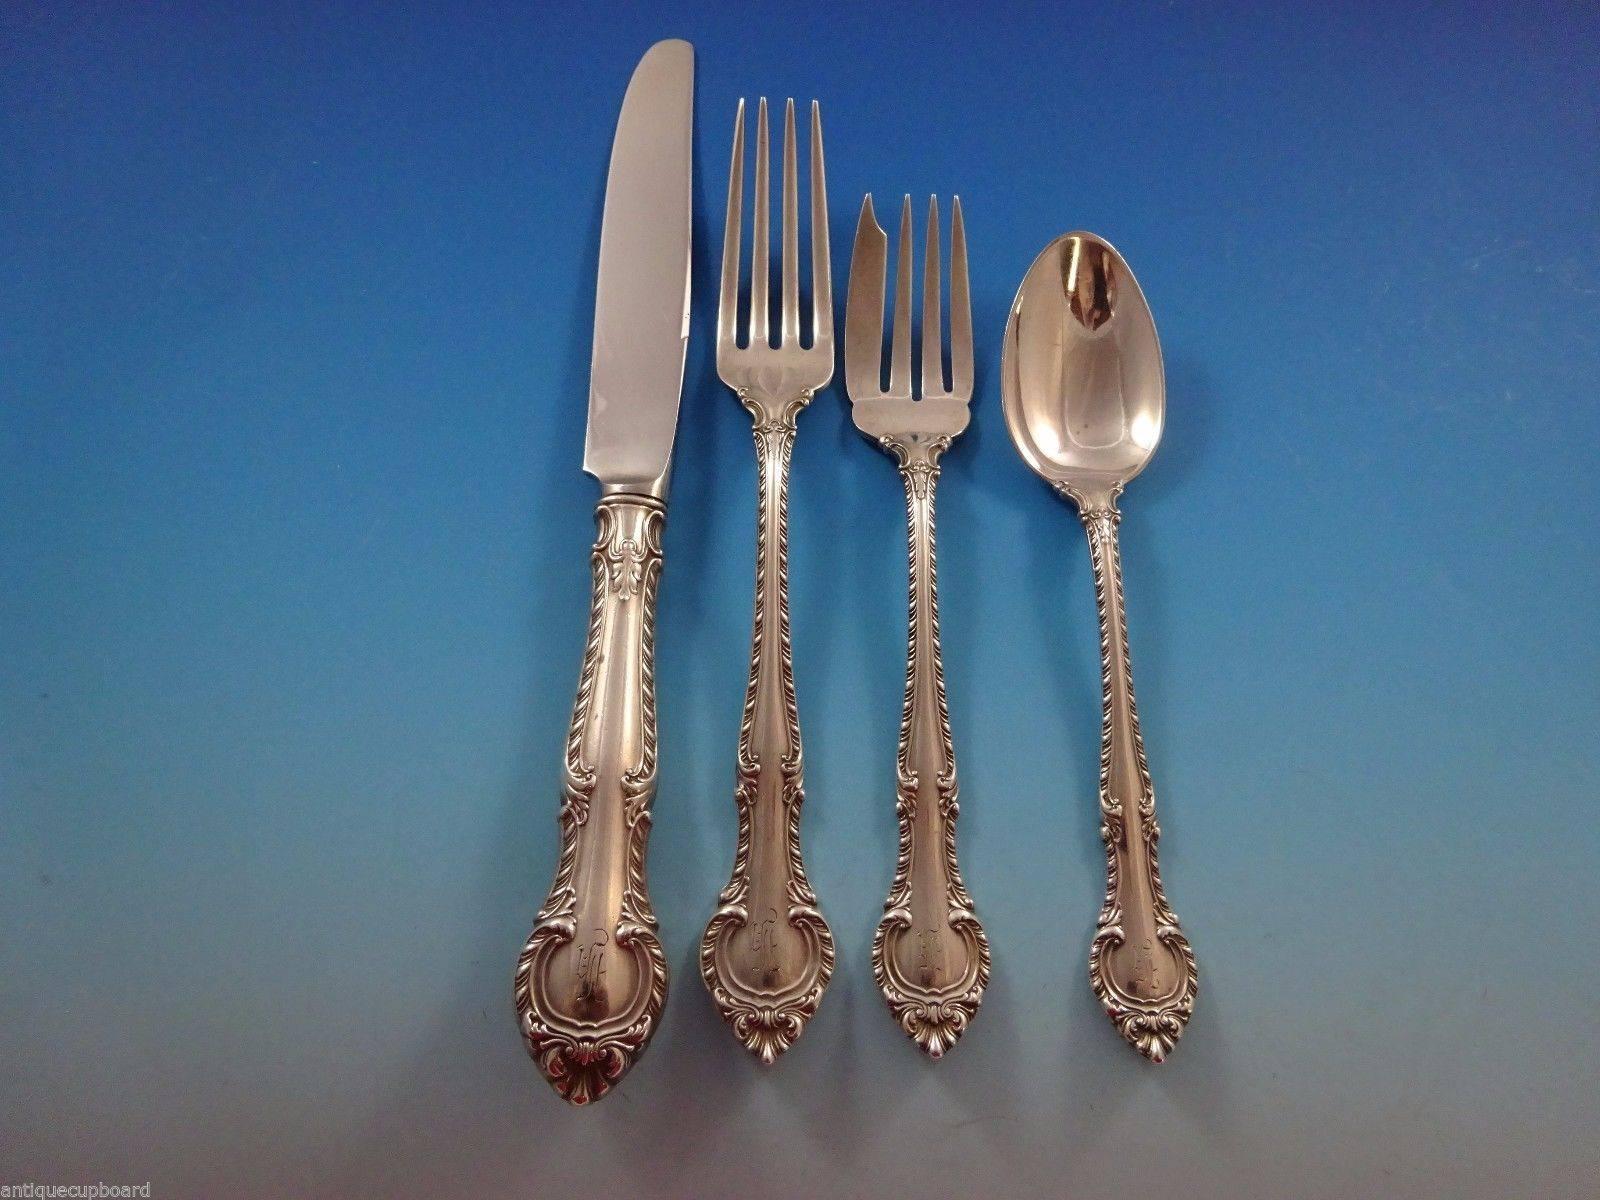 english gadroon sterling silver flatware